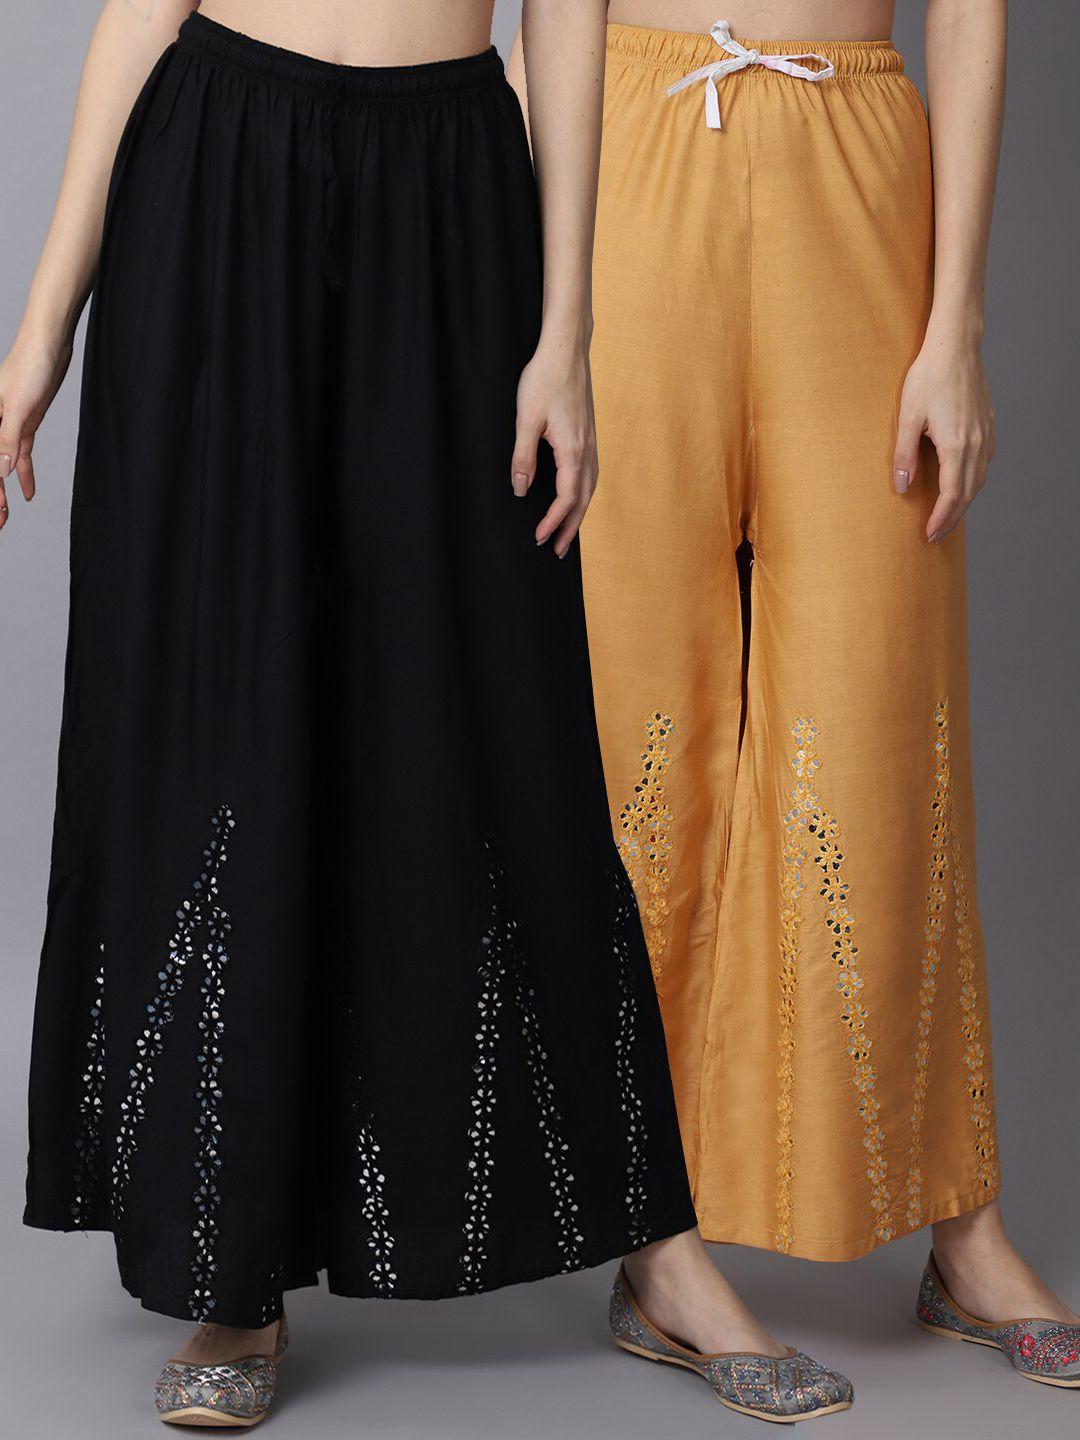 gracit women black & nude-coloured pack of 2 floral flared ethnic palazzos